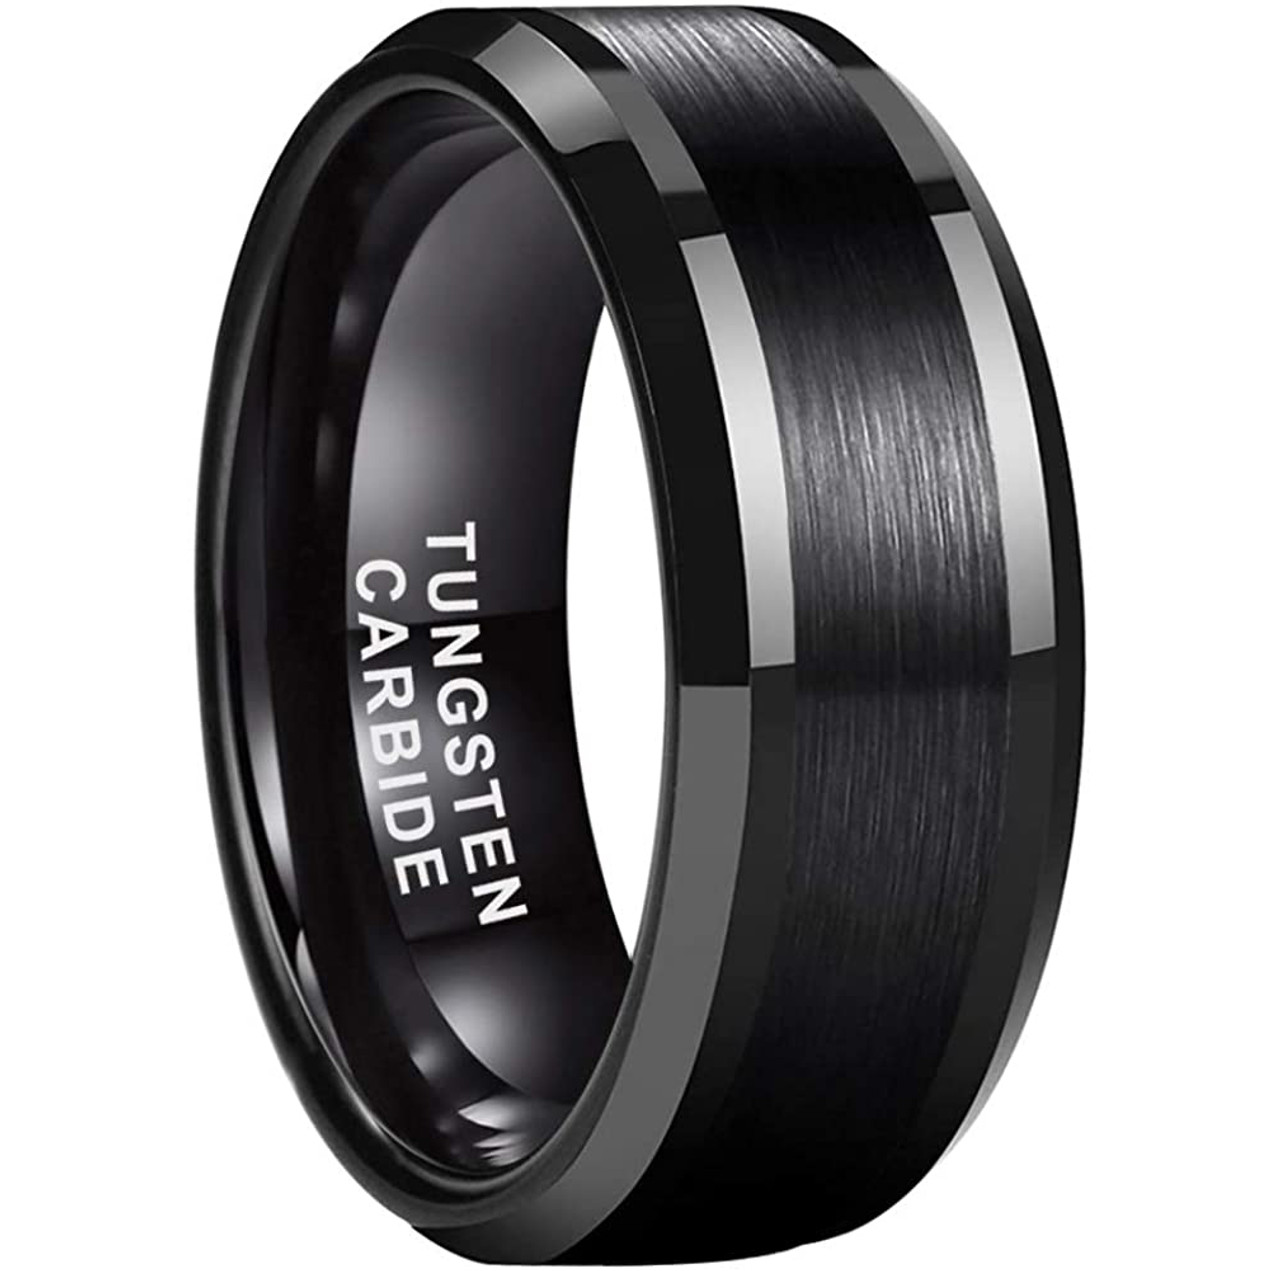 (8mm) Unisex or Men's Tungsten Carbide Wedding Ring Band. Black Tone, High Polish and Matte Finish Striped Center. Comfort Fit Band.